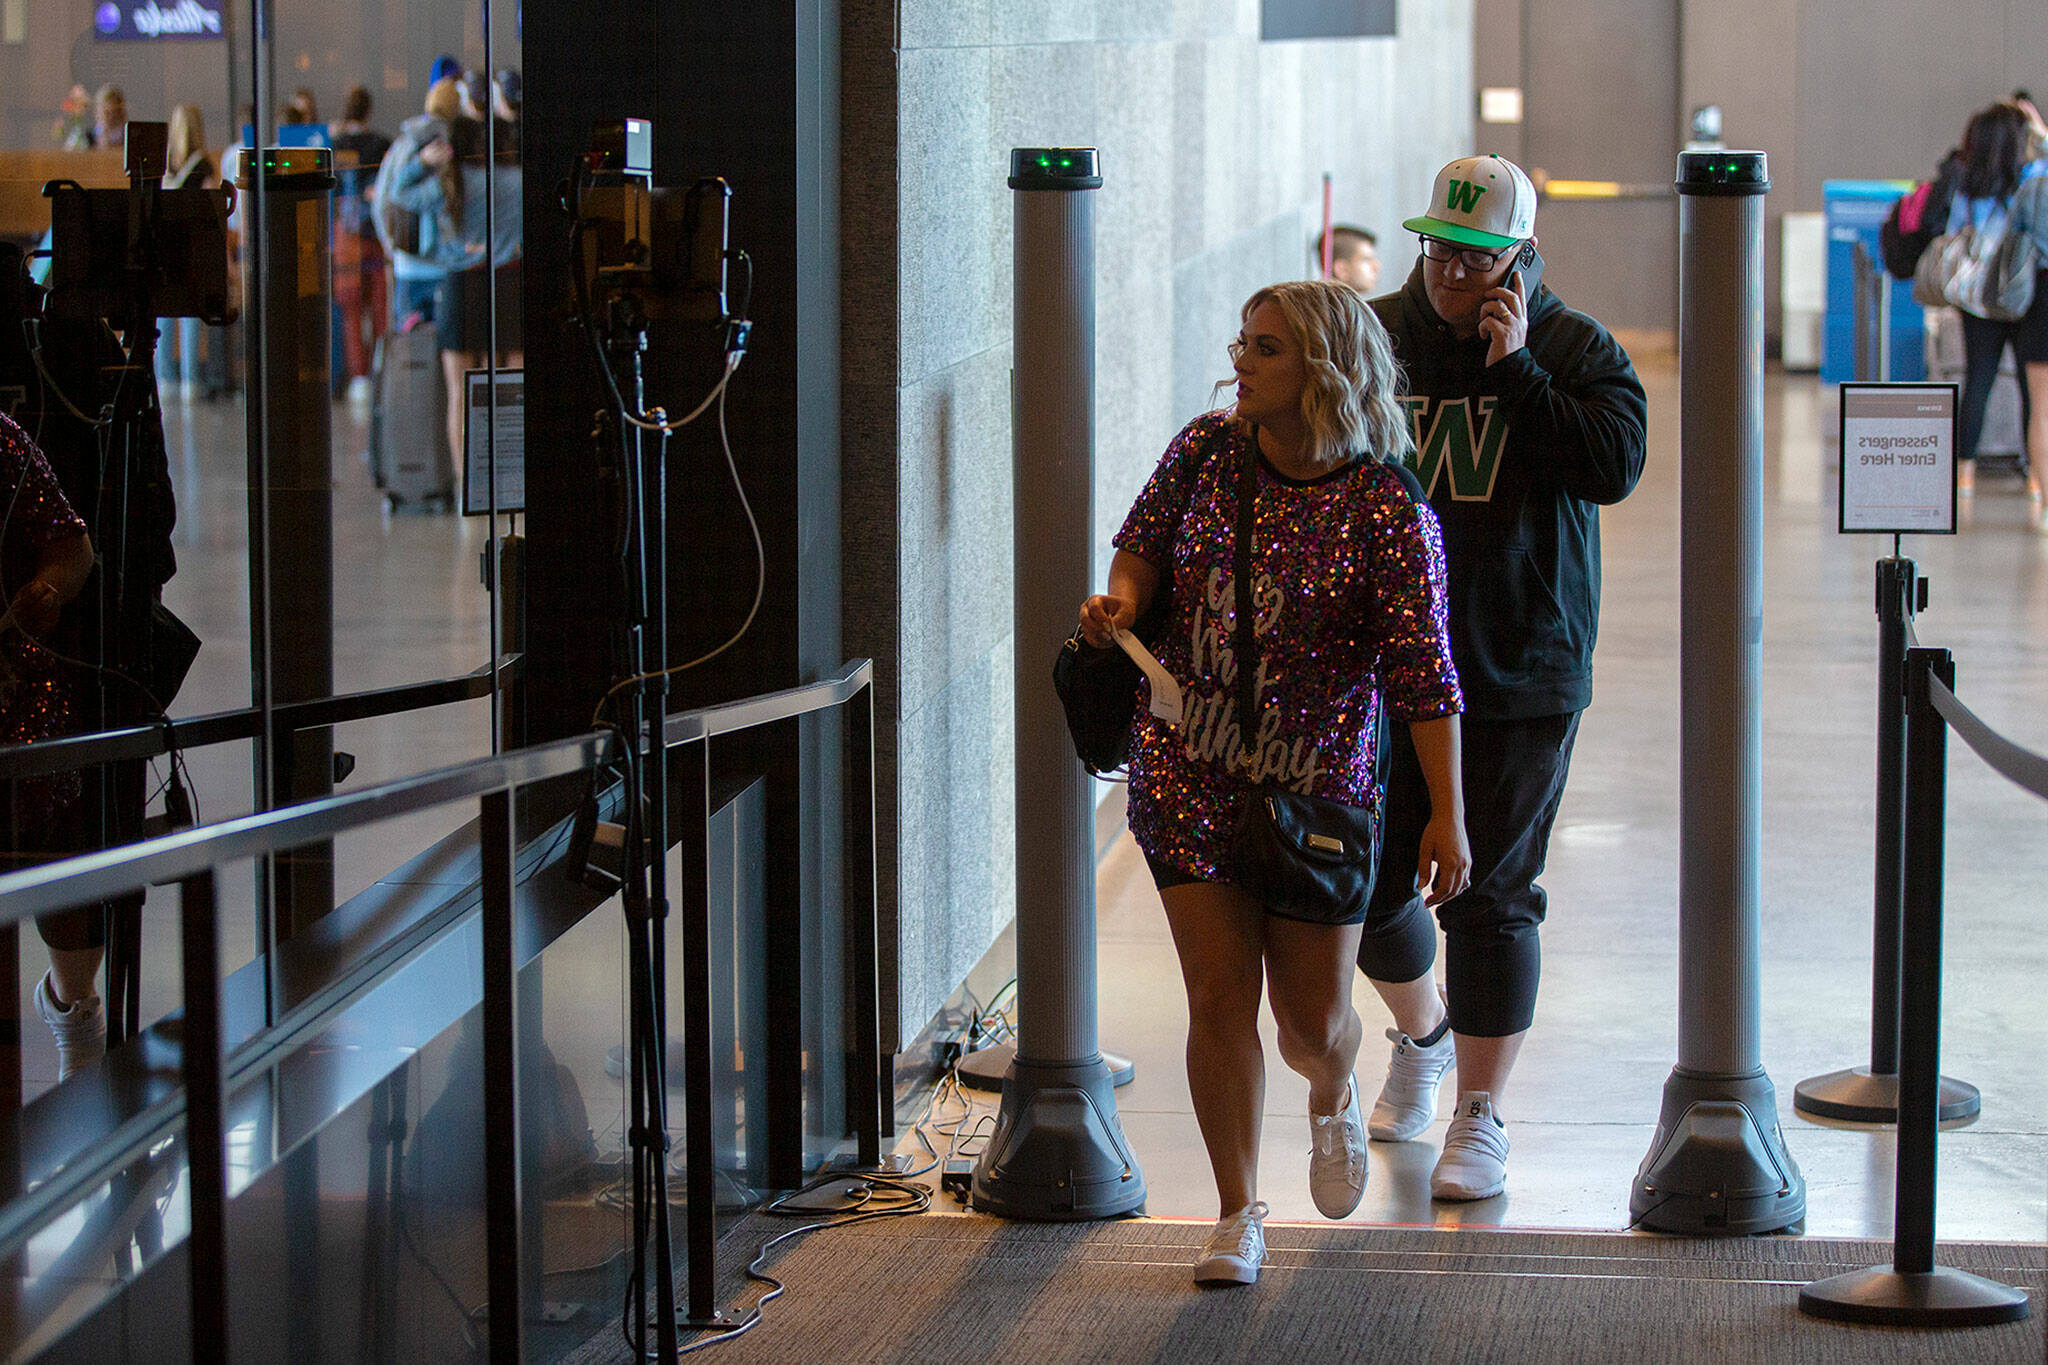 Two travelers walk through two pillars of an Athena screening device on Friday, May 27, 2022, at Paine Field in Everett, Washington. The device works like a metal detector and helps identify weapons on people preparing to go through TSA. (Ryan Berry / The Herald)